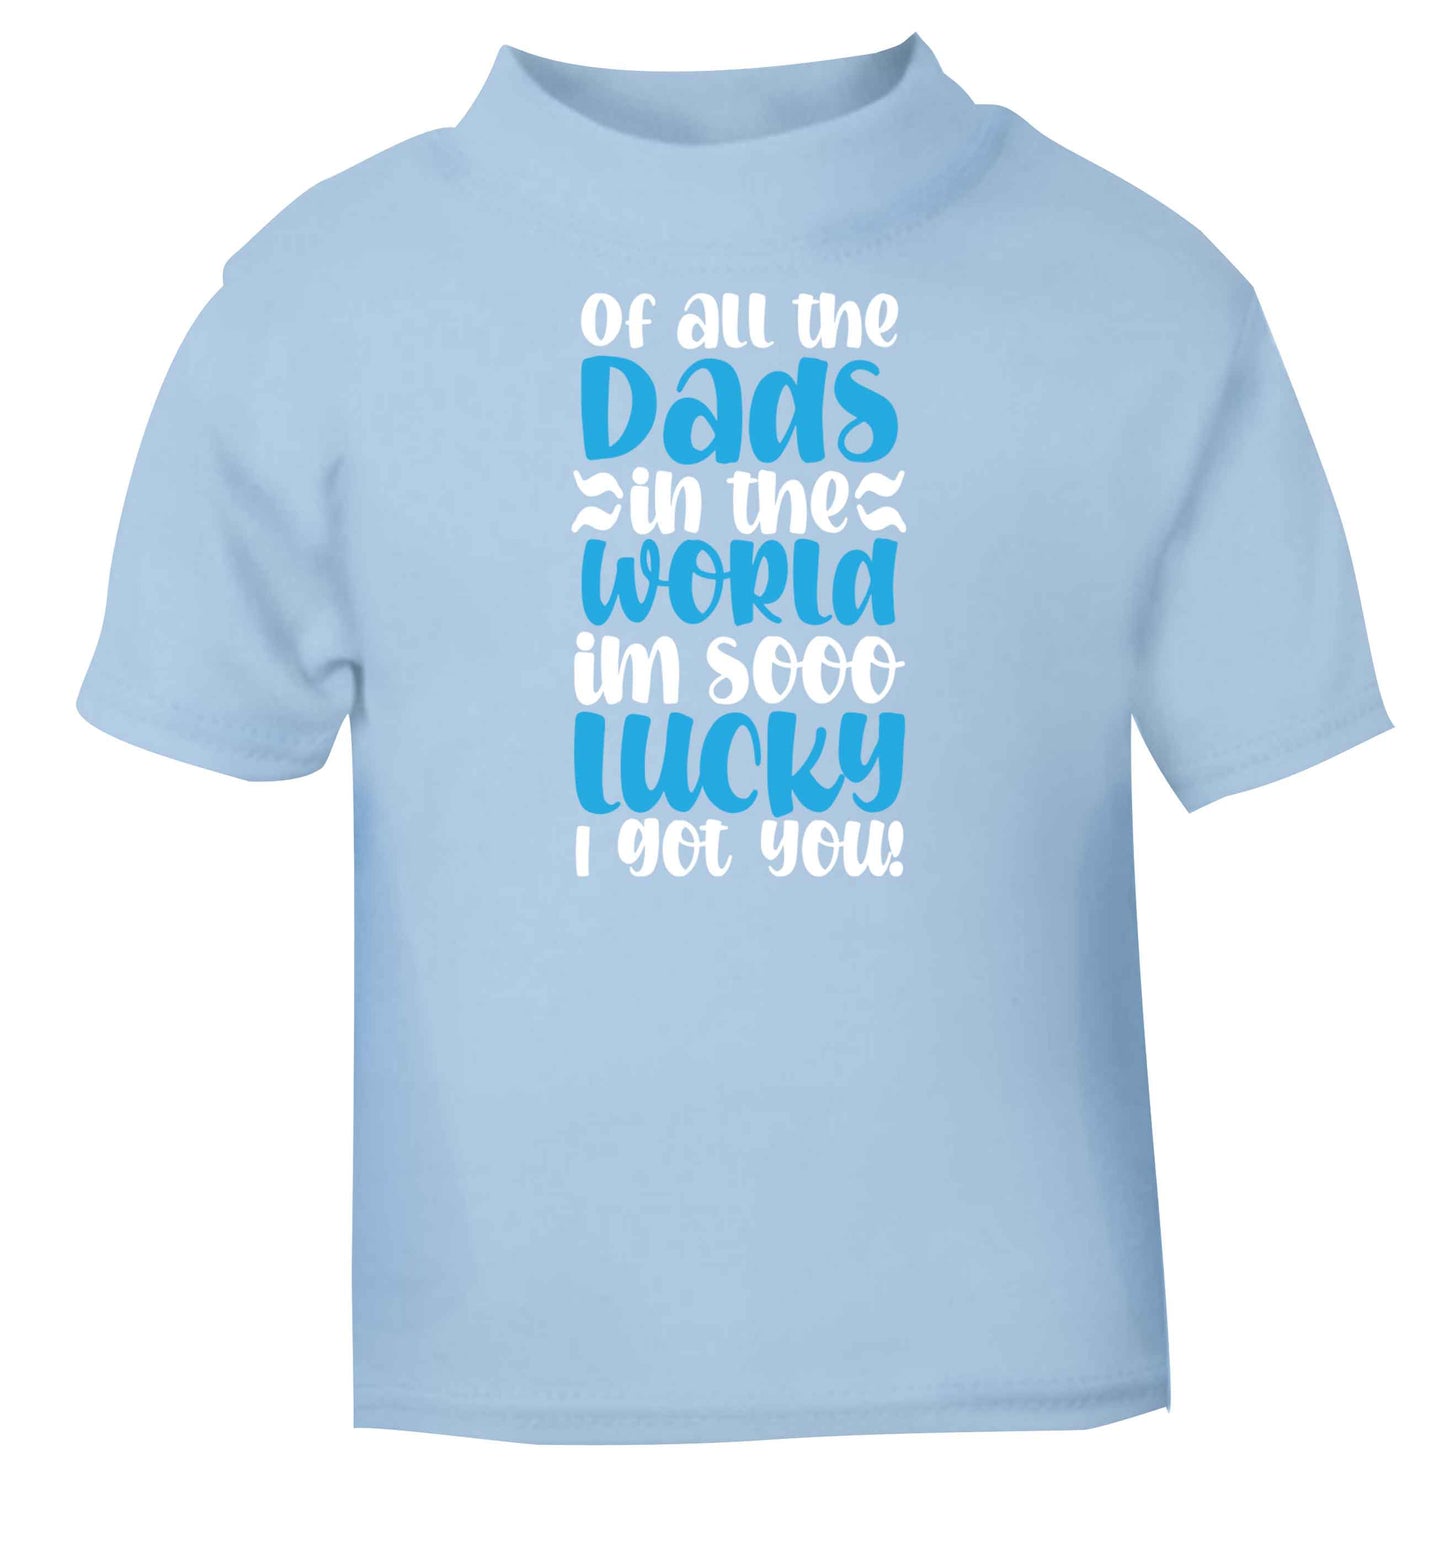 Of all the Dads in the world I'm so lucky I got you light blue baby toddler Tshirt 2 Years